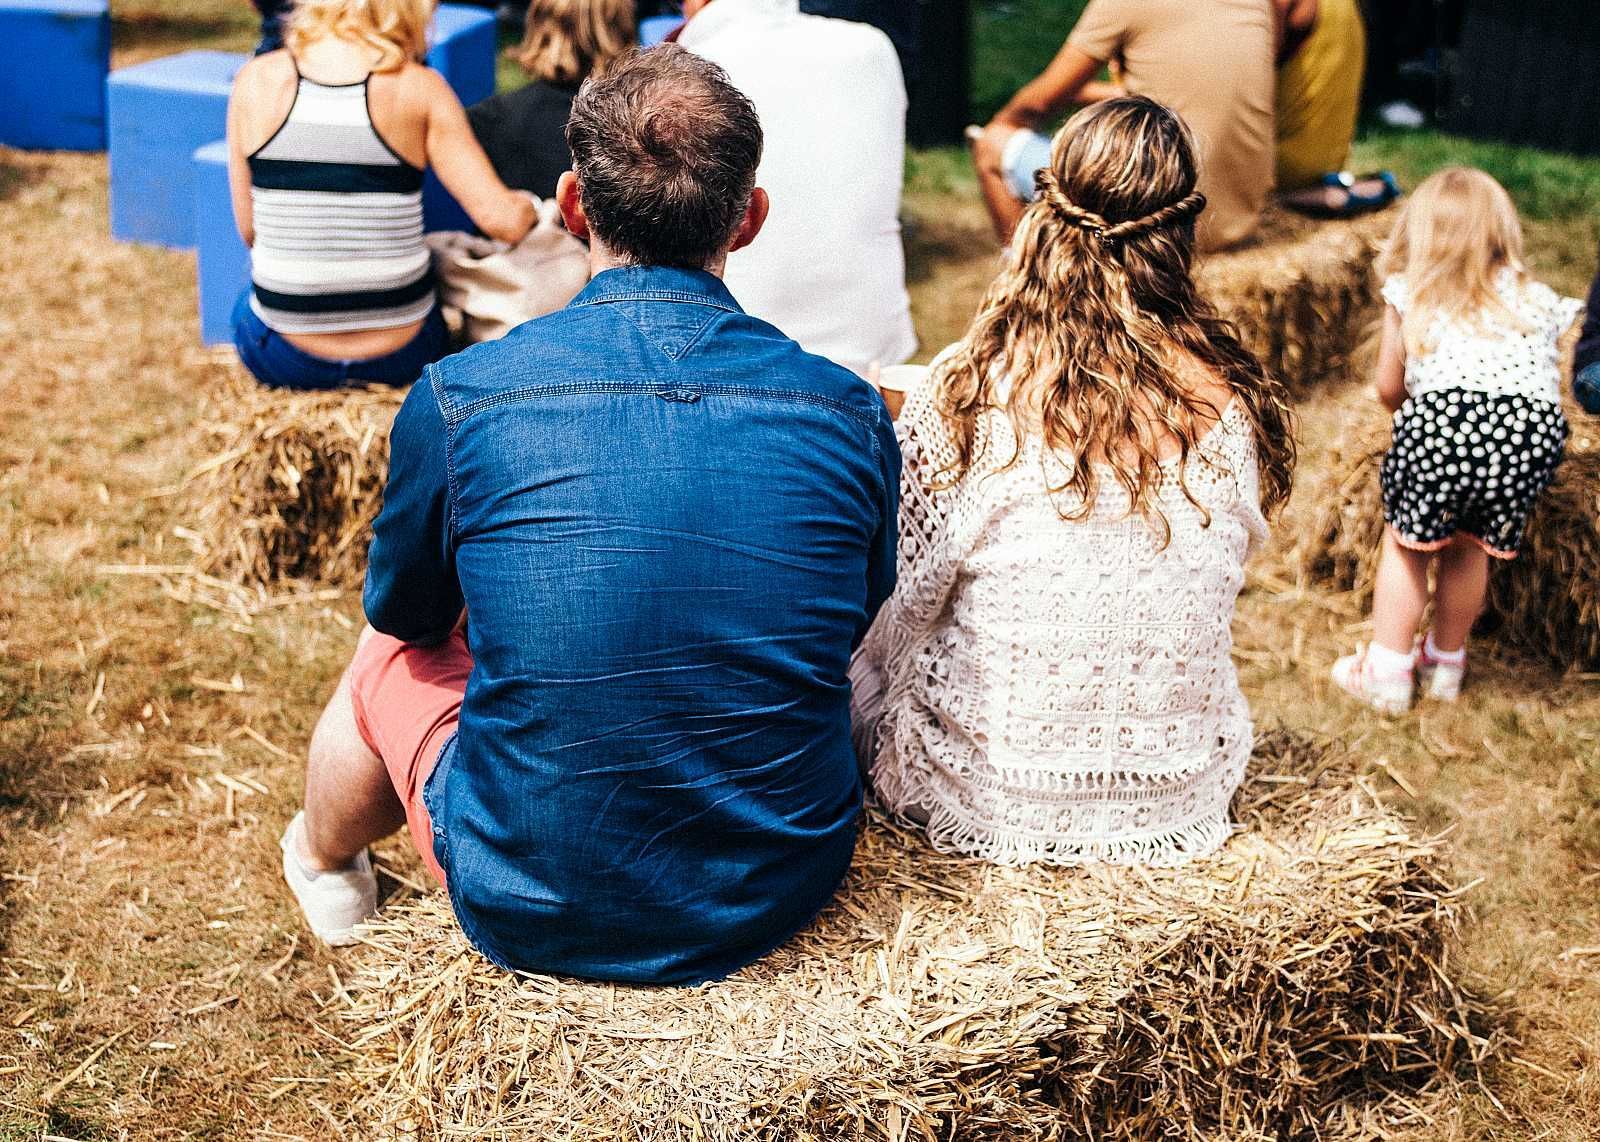 A group of people are sitting on bales of hay.